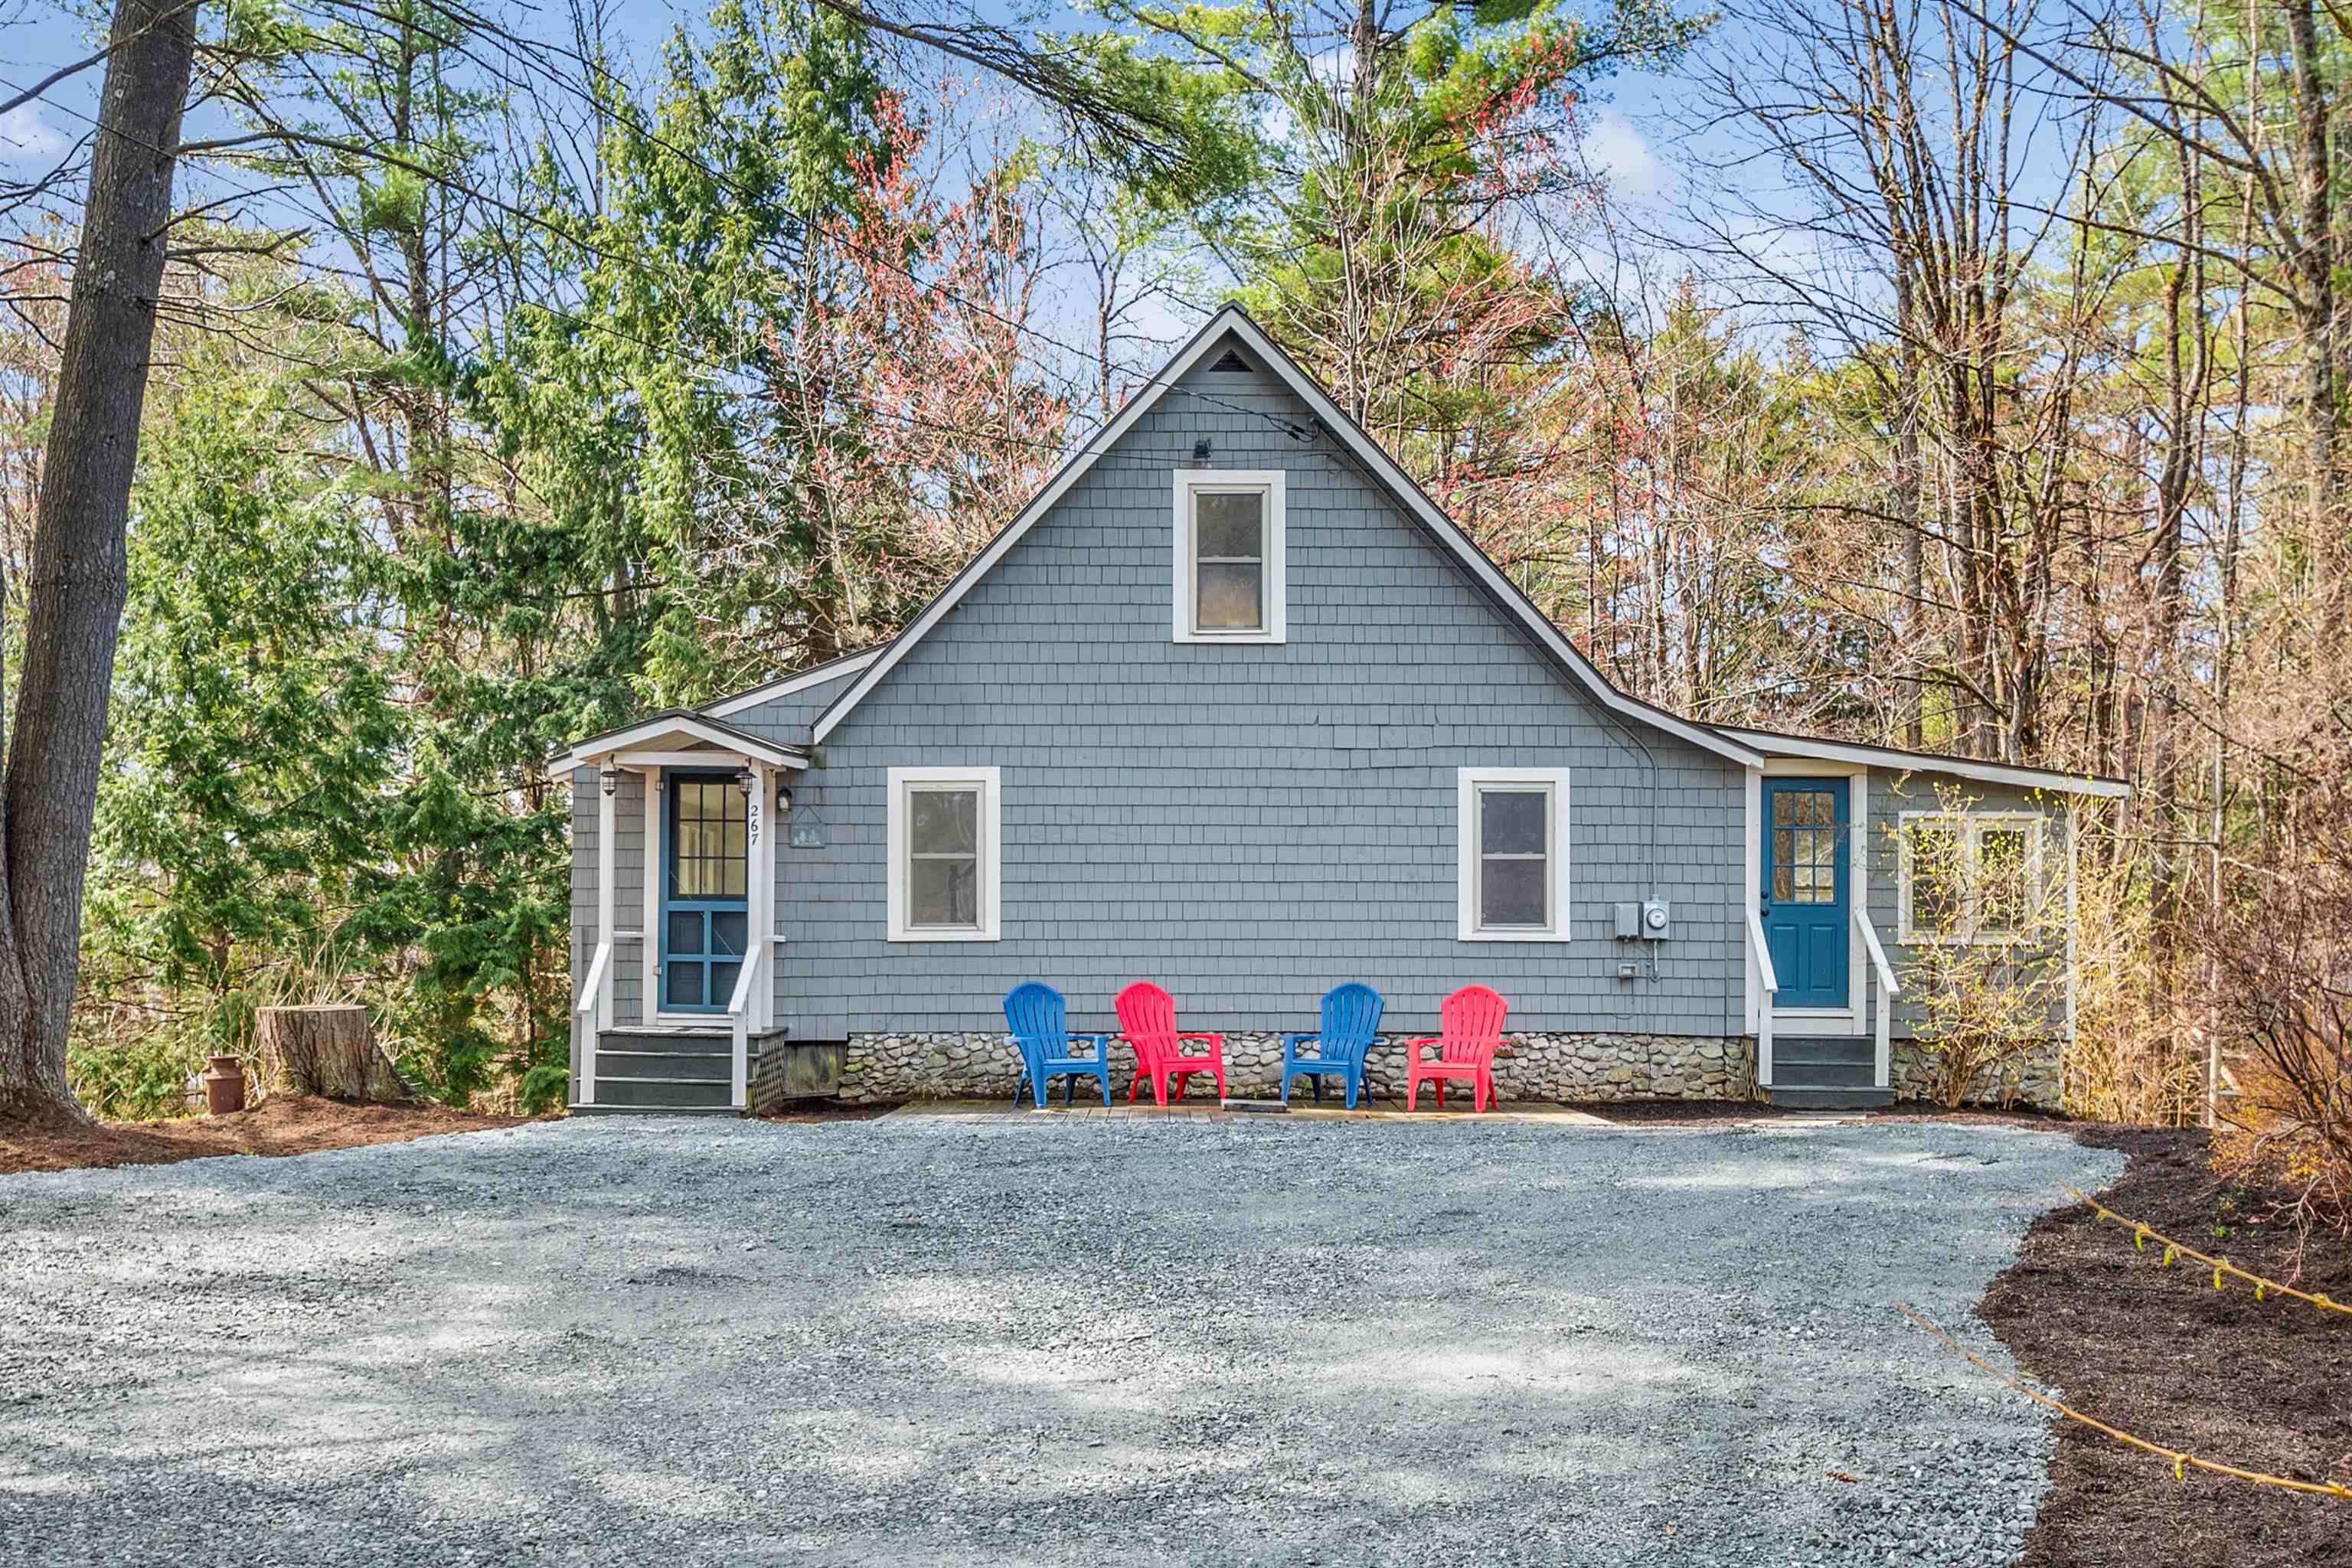 NEW LONDON NH Homes for sale